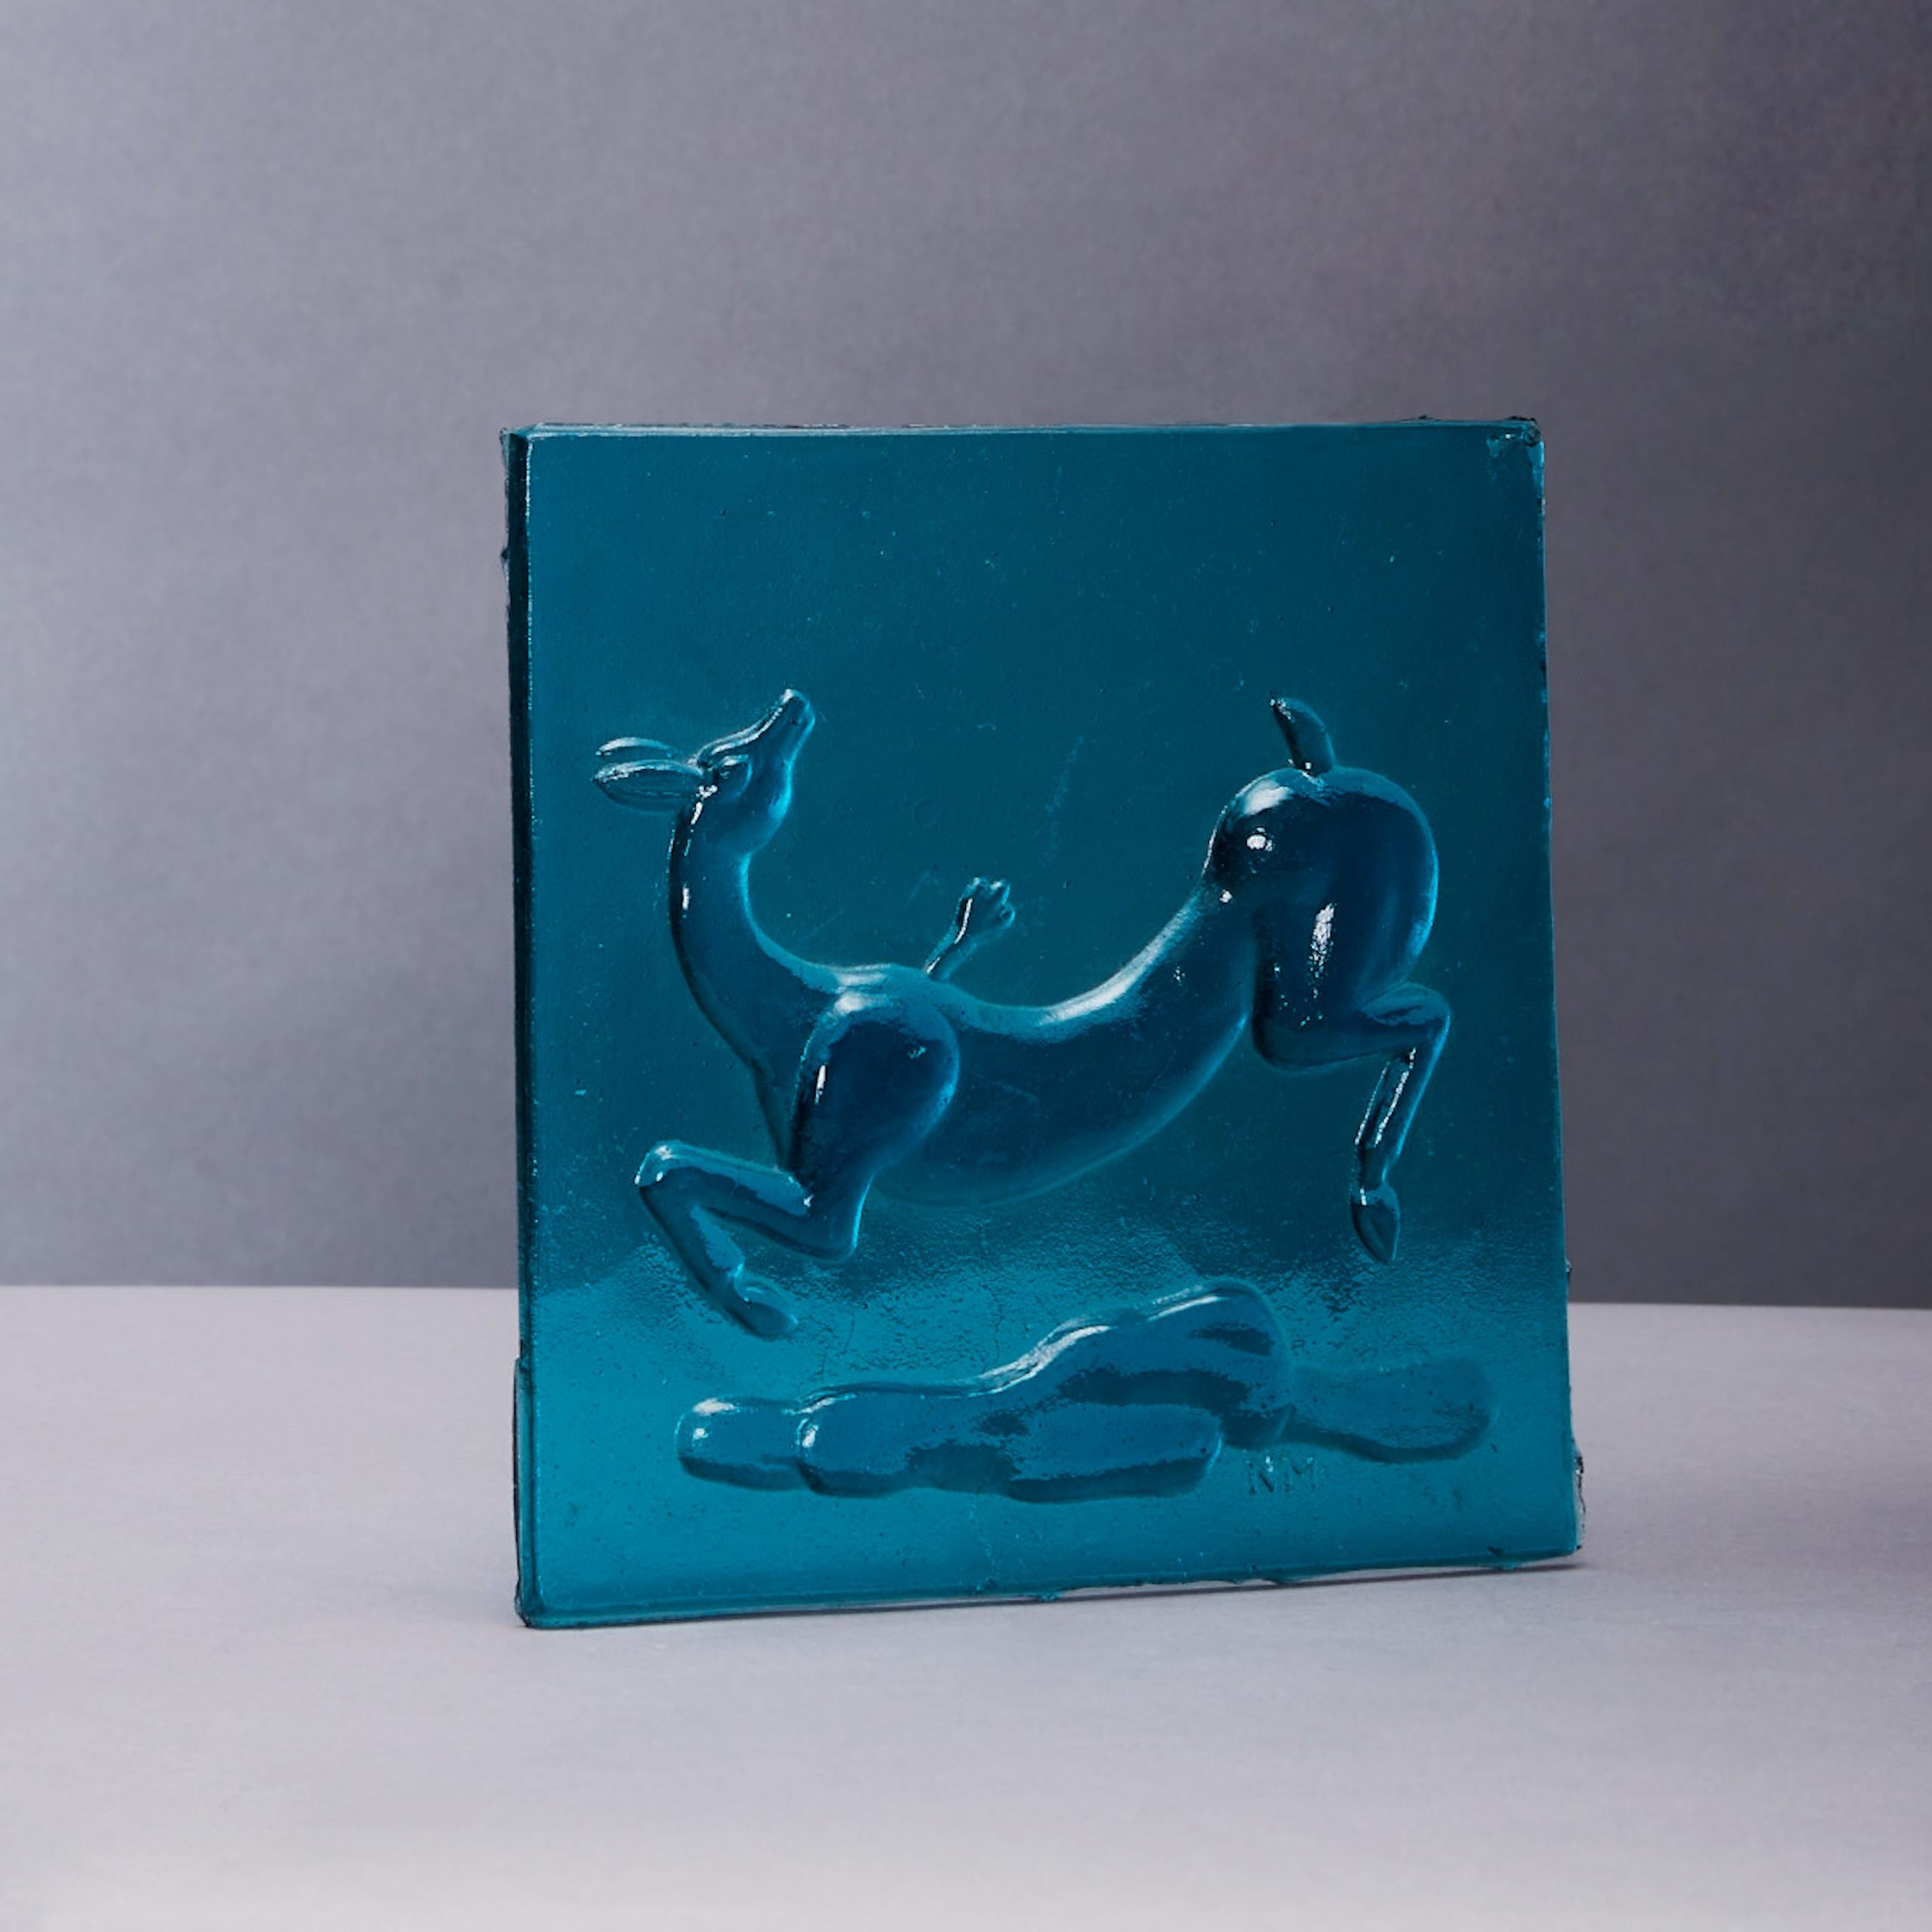 Aqua blue molded glass tileby Napoleone Martinuzzi (1892-1977) circa 1930 for Venini, molded mark 'NM',  depicting a wounded gazelle  .
An example of this model was employed in a floor lamp design for a hall or winter garden that was exhibited at